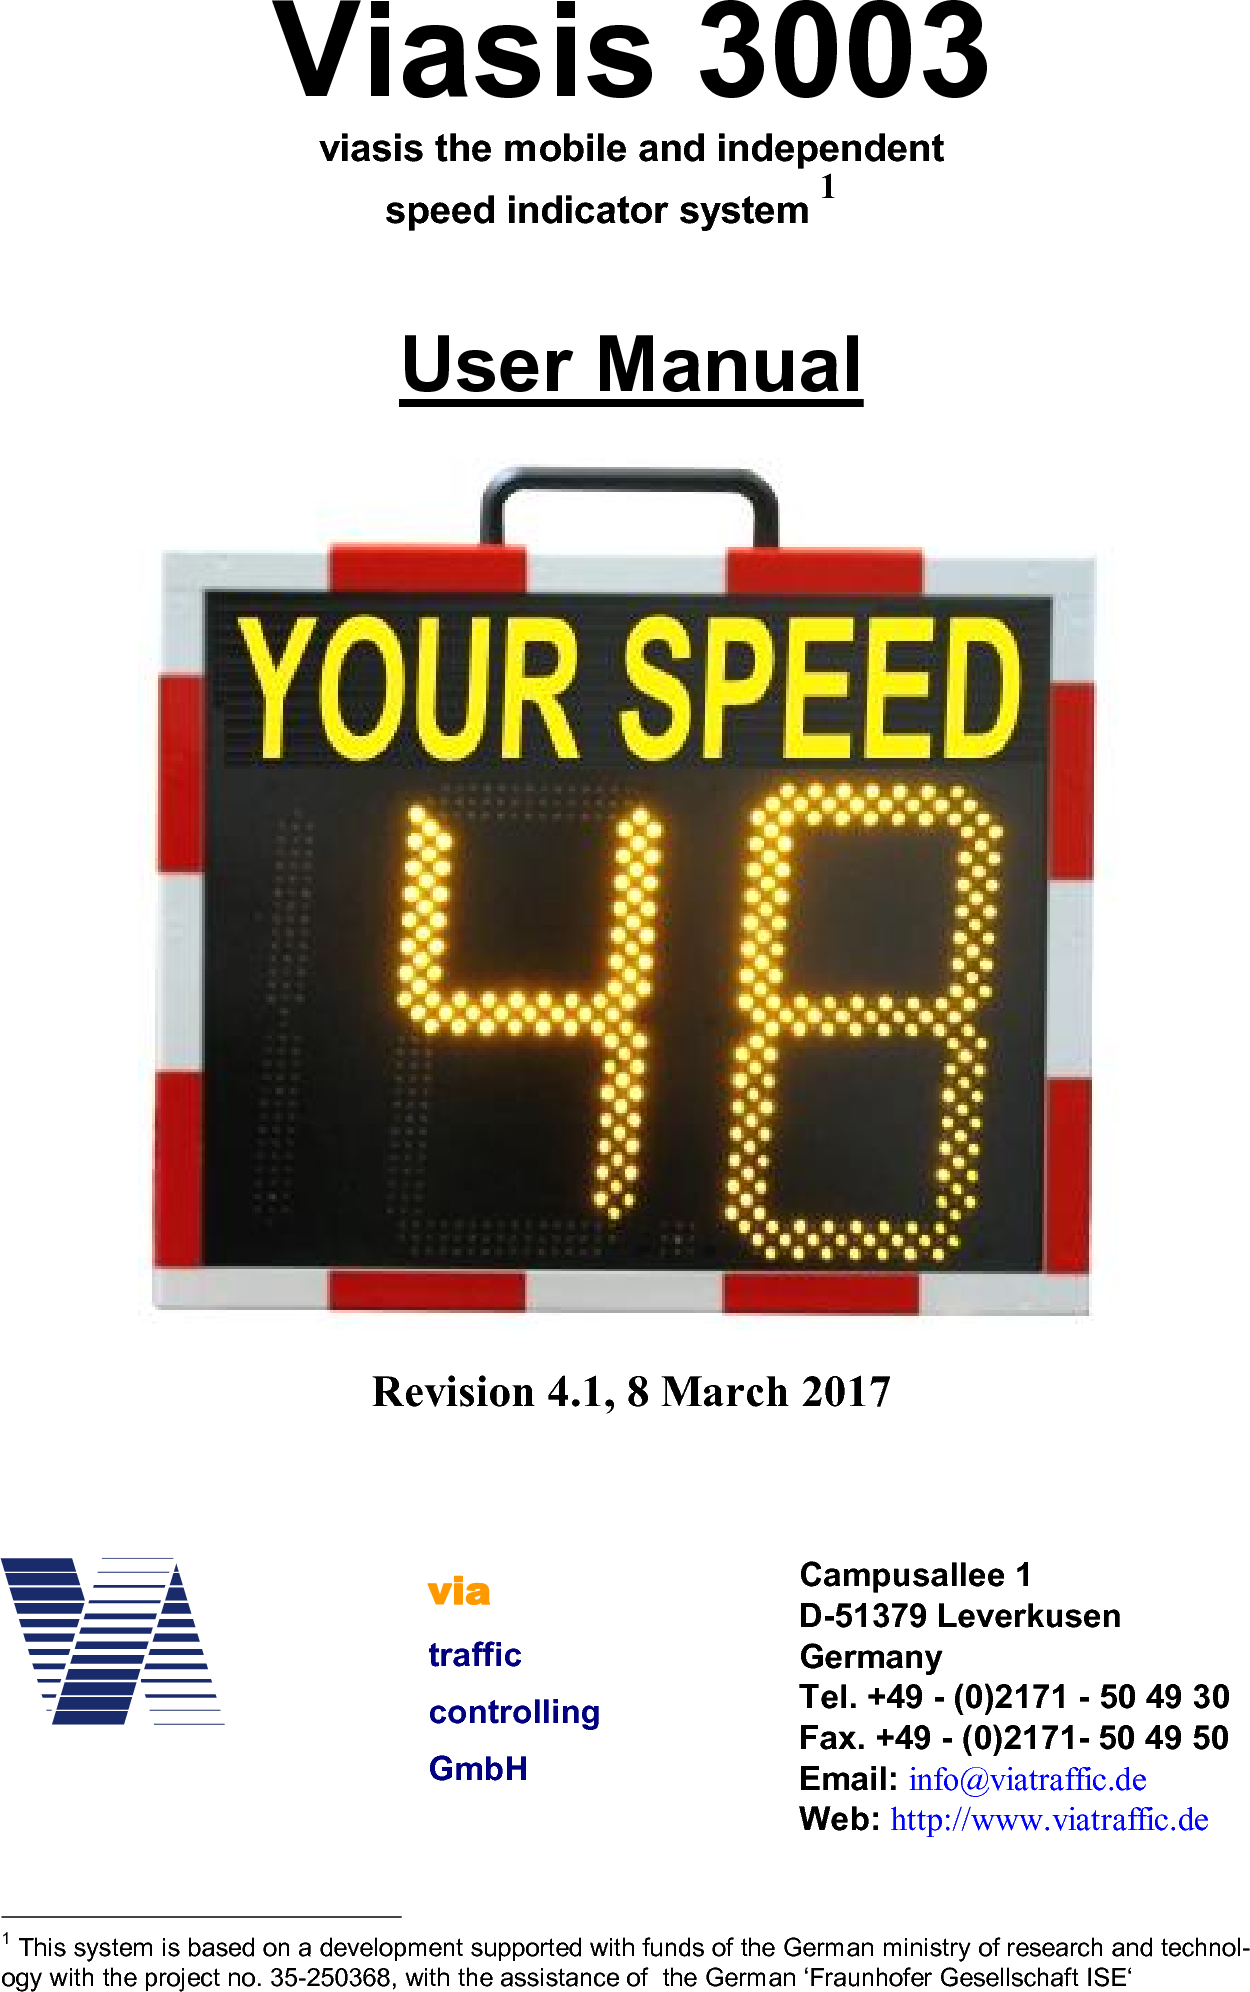 Viasis 3003viasis the mobile and independentspeed indicator system 1User ManualRevision 4.1, 8 March 20171 This system is based on a development supported with funds of the German ministry of research and technol-ogy with the project no. 35-250368, with the assistance of  the German ‘Fraunhofer Gesellschaft ISE‘viatrafficcontrollingGmbHCampusallee 1D-51379 LeverkusenGermanyTel. +49 - (0)2171 - 50 49 30Fax. +49 - (0)2171- 50 49 50Email: info@viatraffic.deWeb: http://www.viatraffic.de